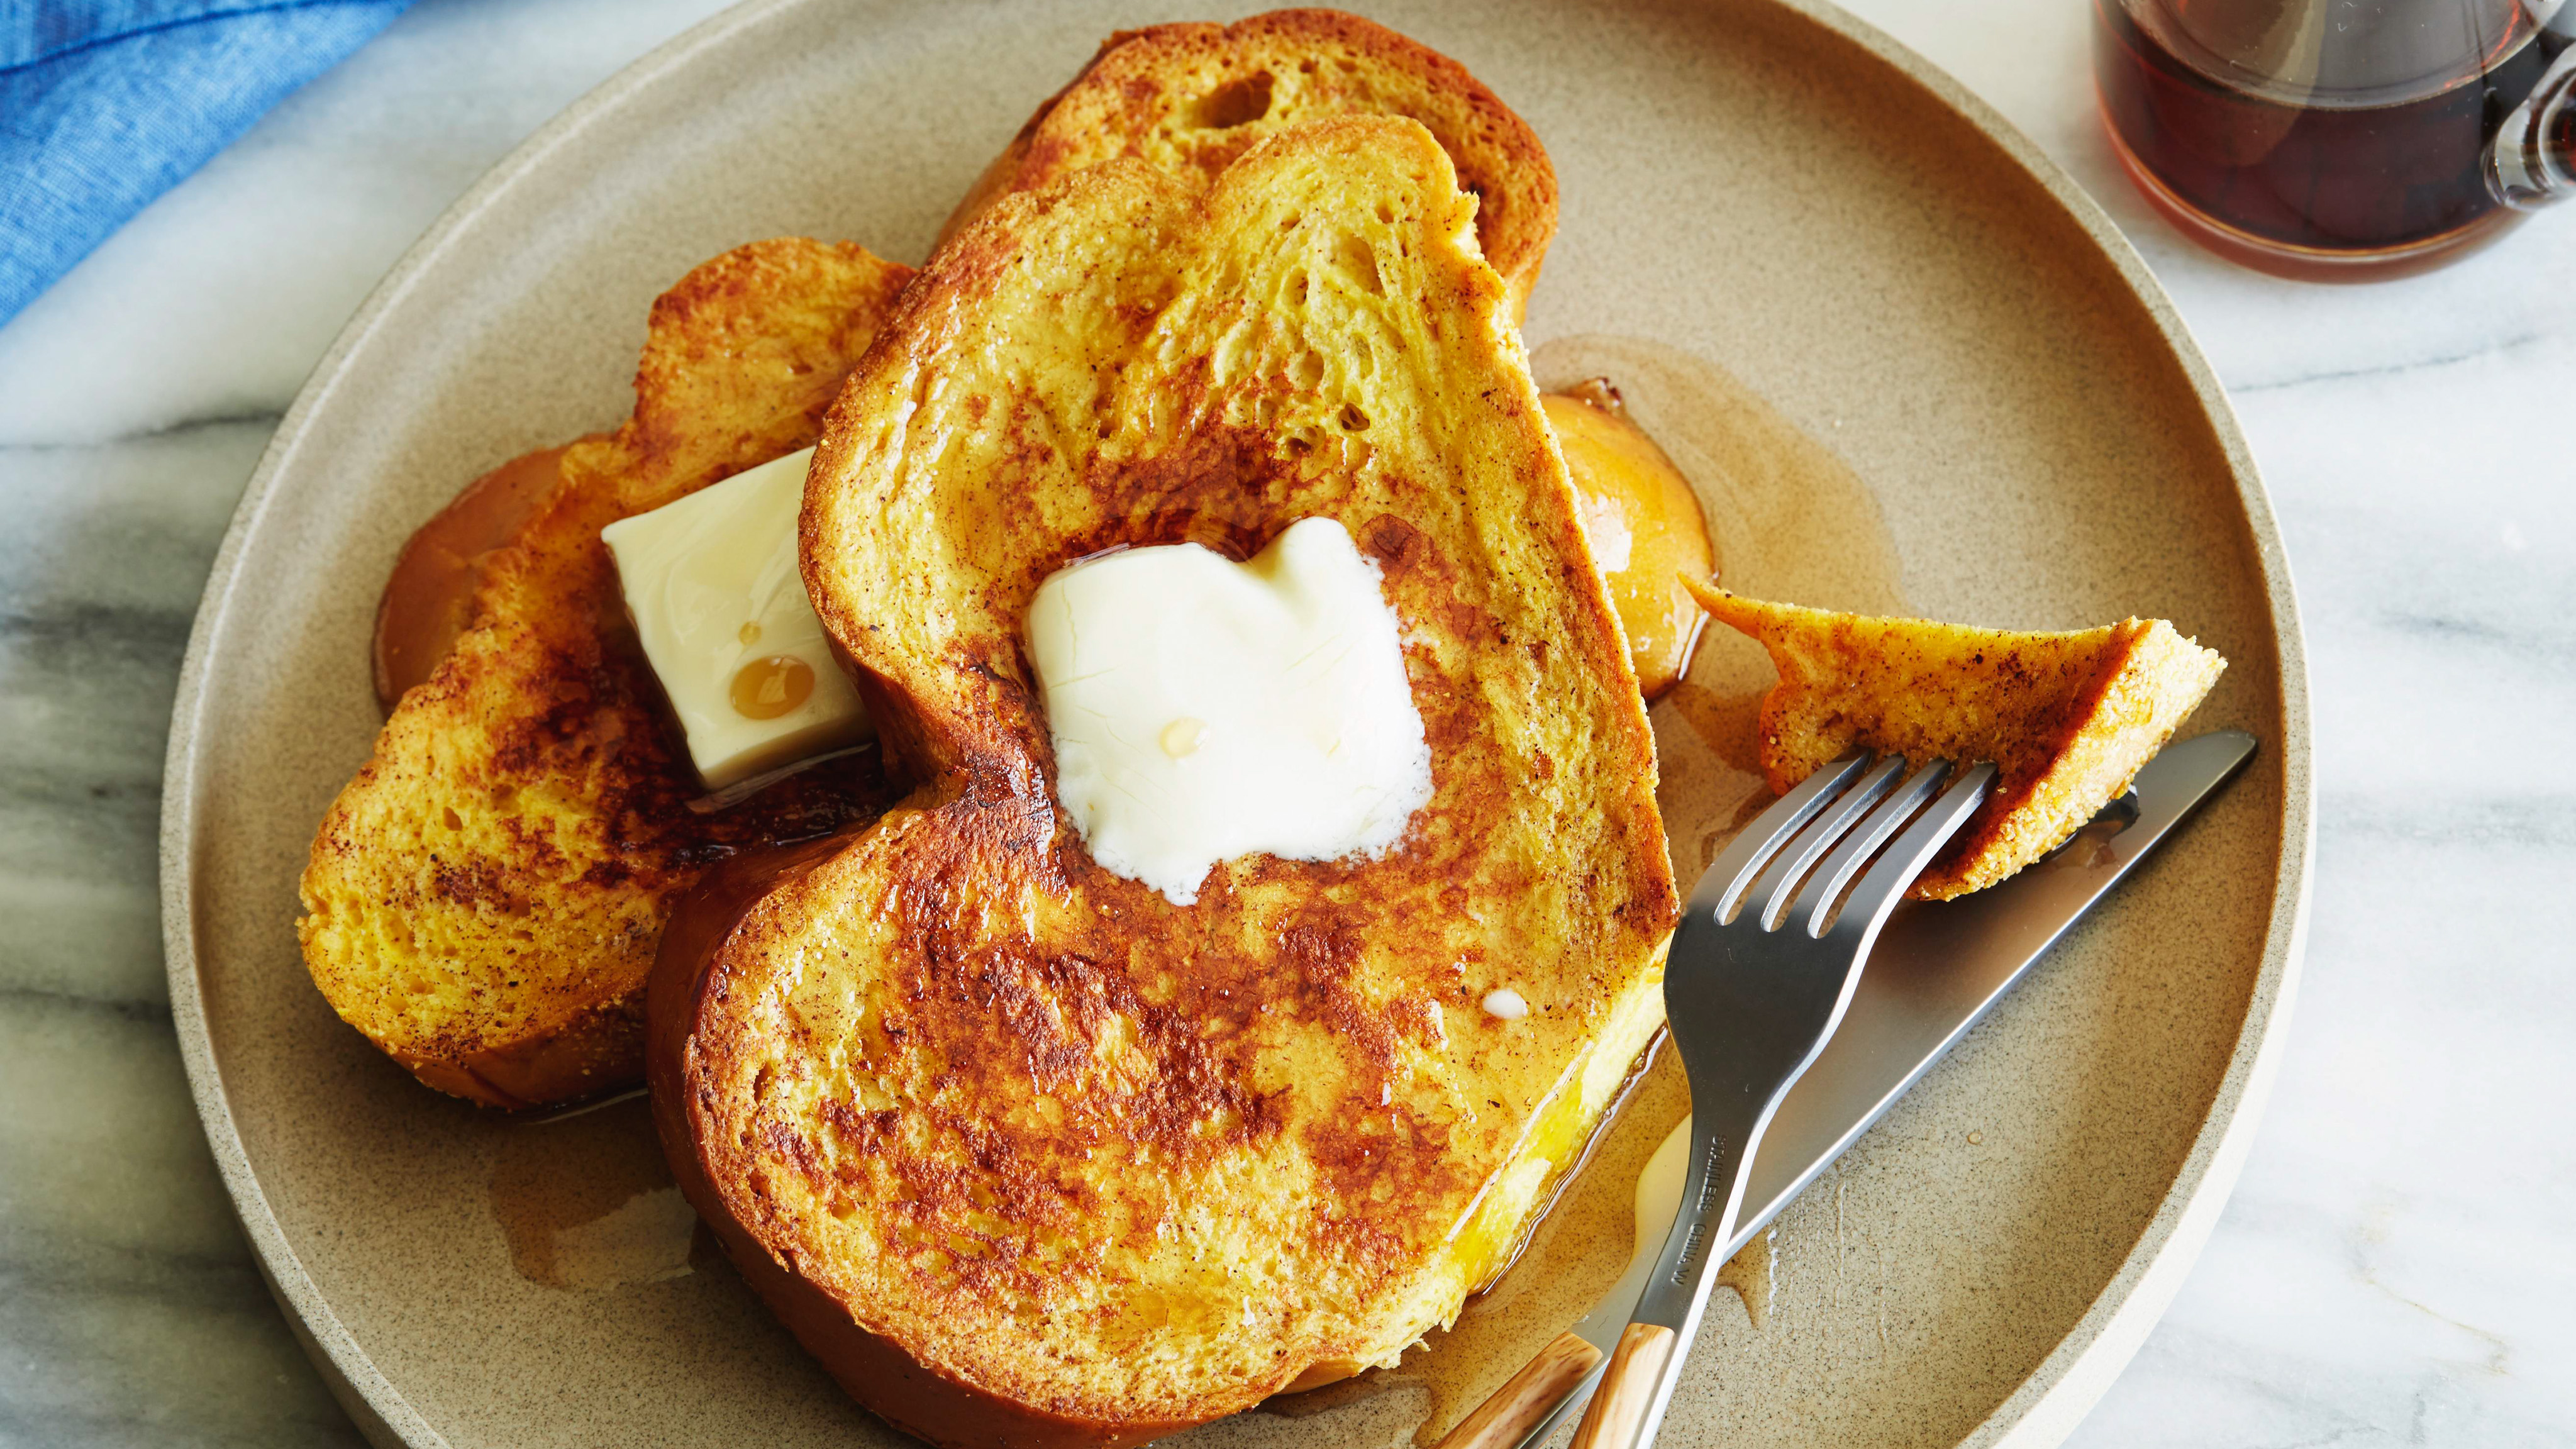 FRENCH TOAST, Robert Irvine, Dinner: Impossible/Groundhog Daze, Food Network,
Cinnamon, Nutmeg, Sugar, Butter, Eggs, Milk, Vanilla Extract, Challah, Brioche, or White
Bread, Maple Syrup,FRENCH TOAST, Robert Irvine, Dinner: Impossible/Groundhog Daze, Food Network,
Cinnamon, Nutmeg, Sugar, Butter, Eggs, Milk, Vanilla Extract, Challah, Brioche, or White
Bread, Maple Syrup